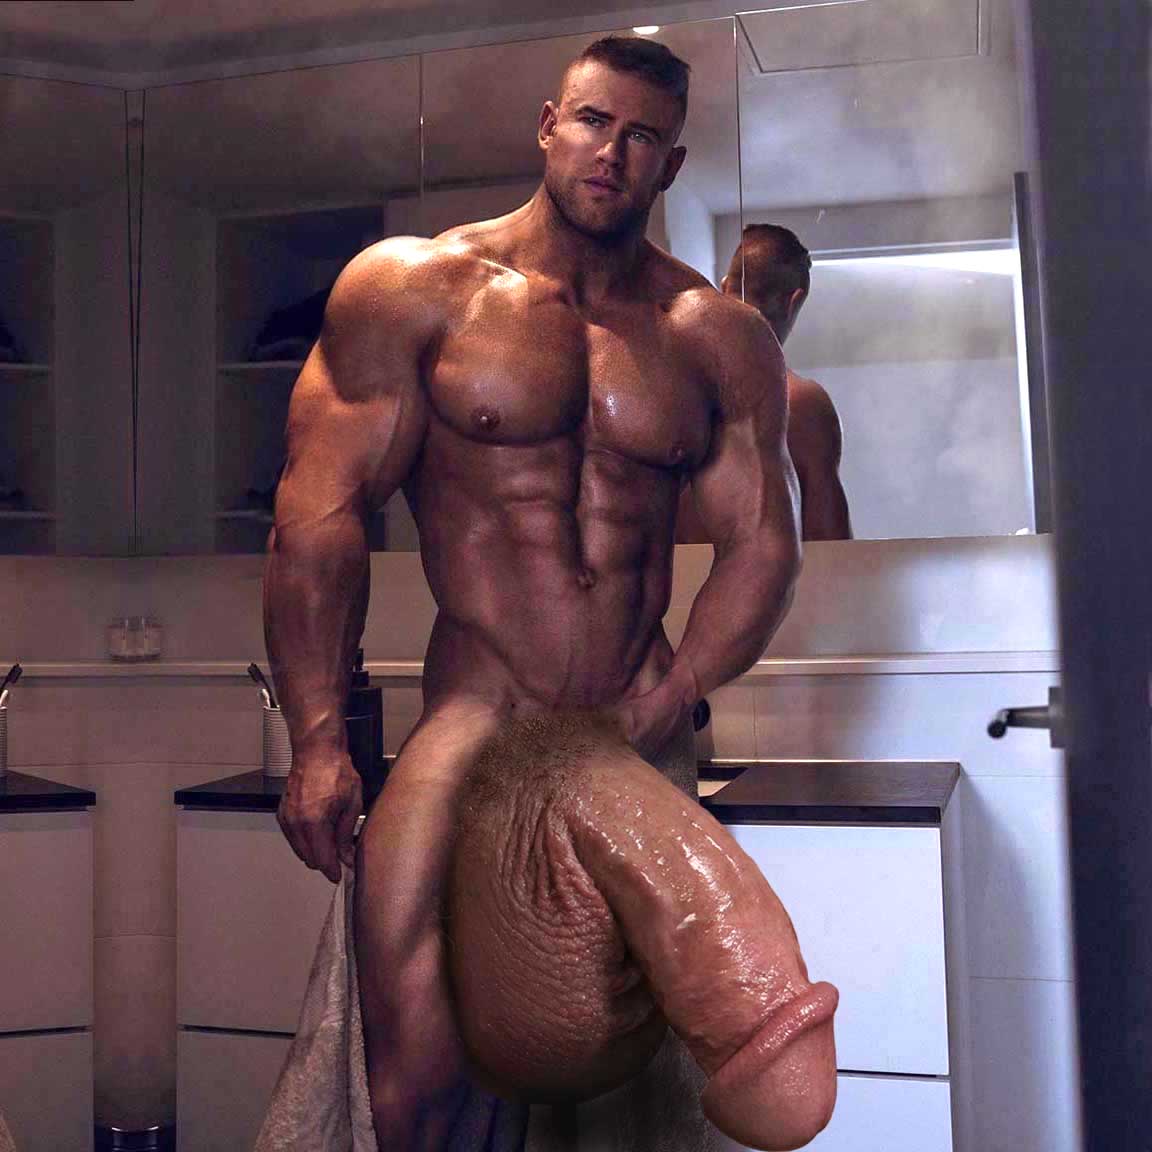 Gigantic Huge Meat: I thought my dick was huge until I saw some of the othe...